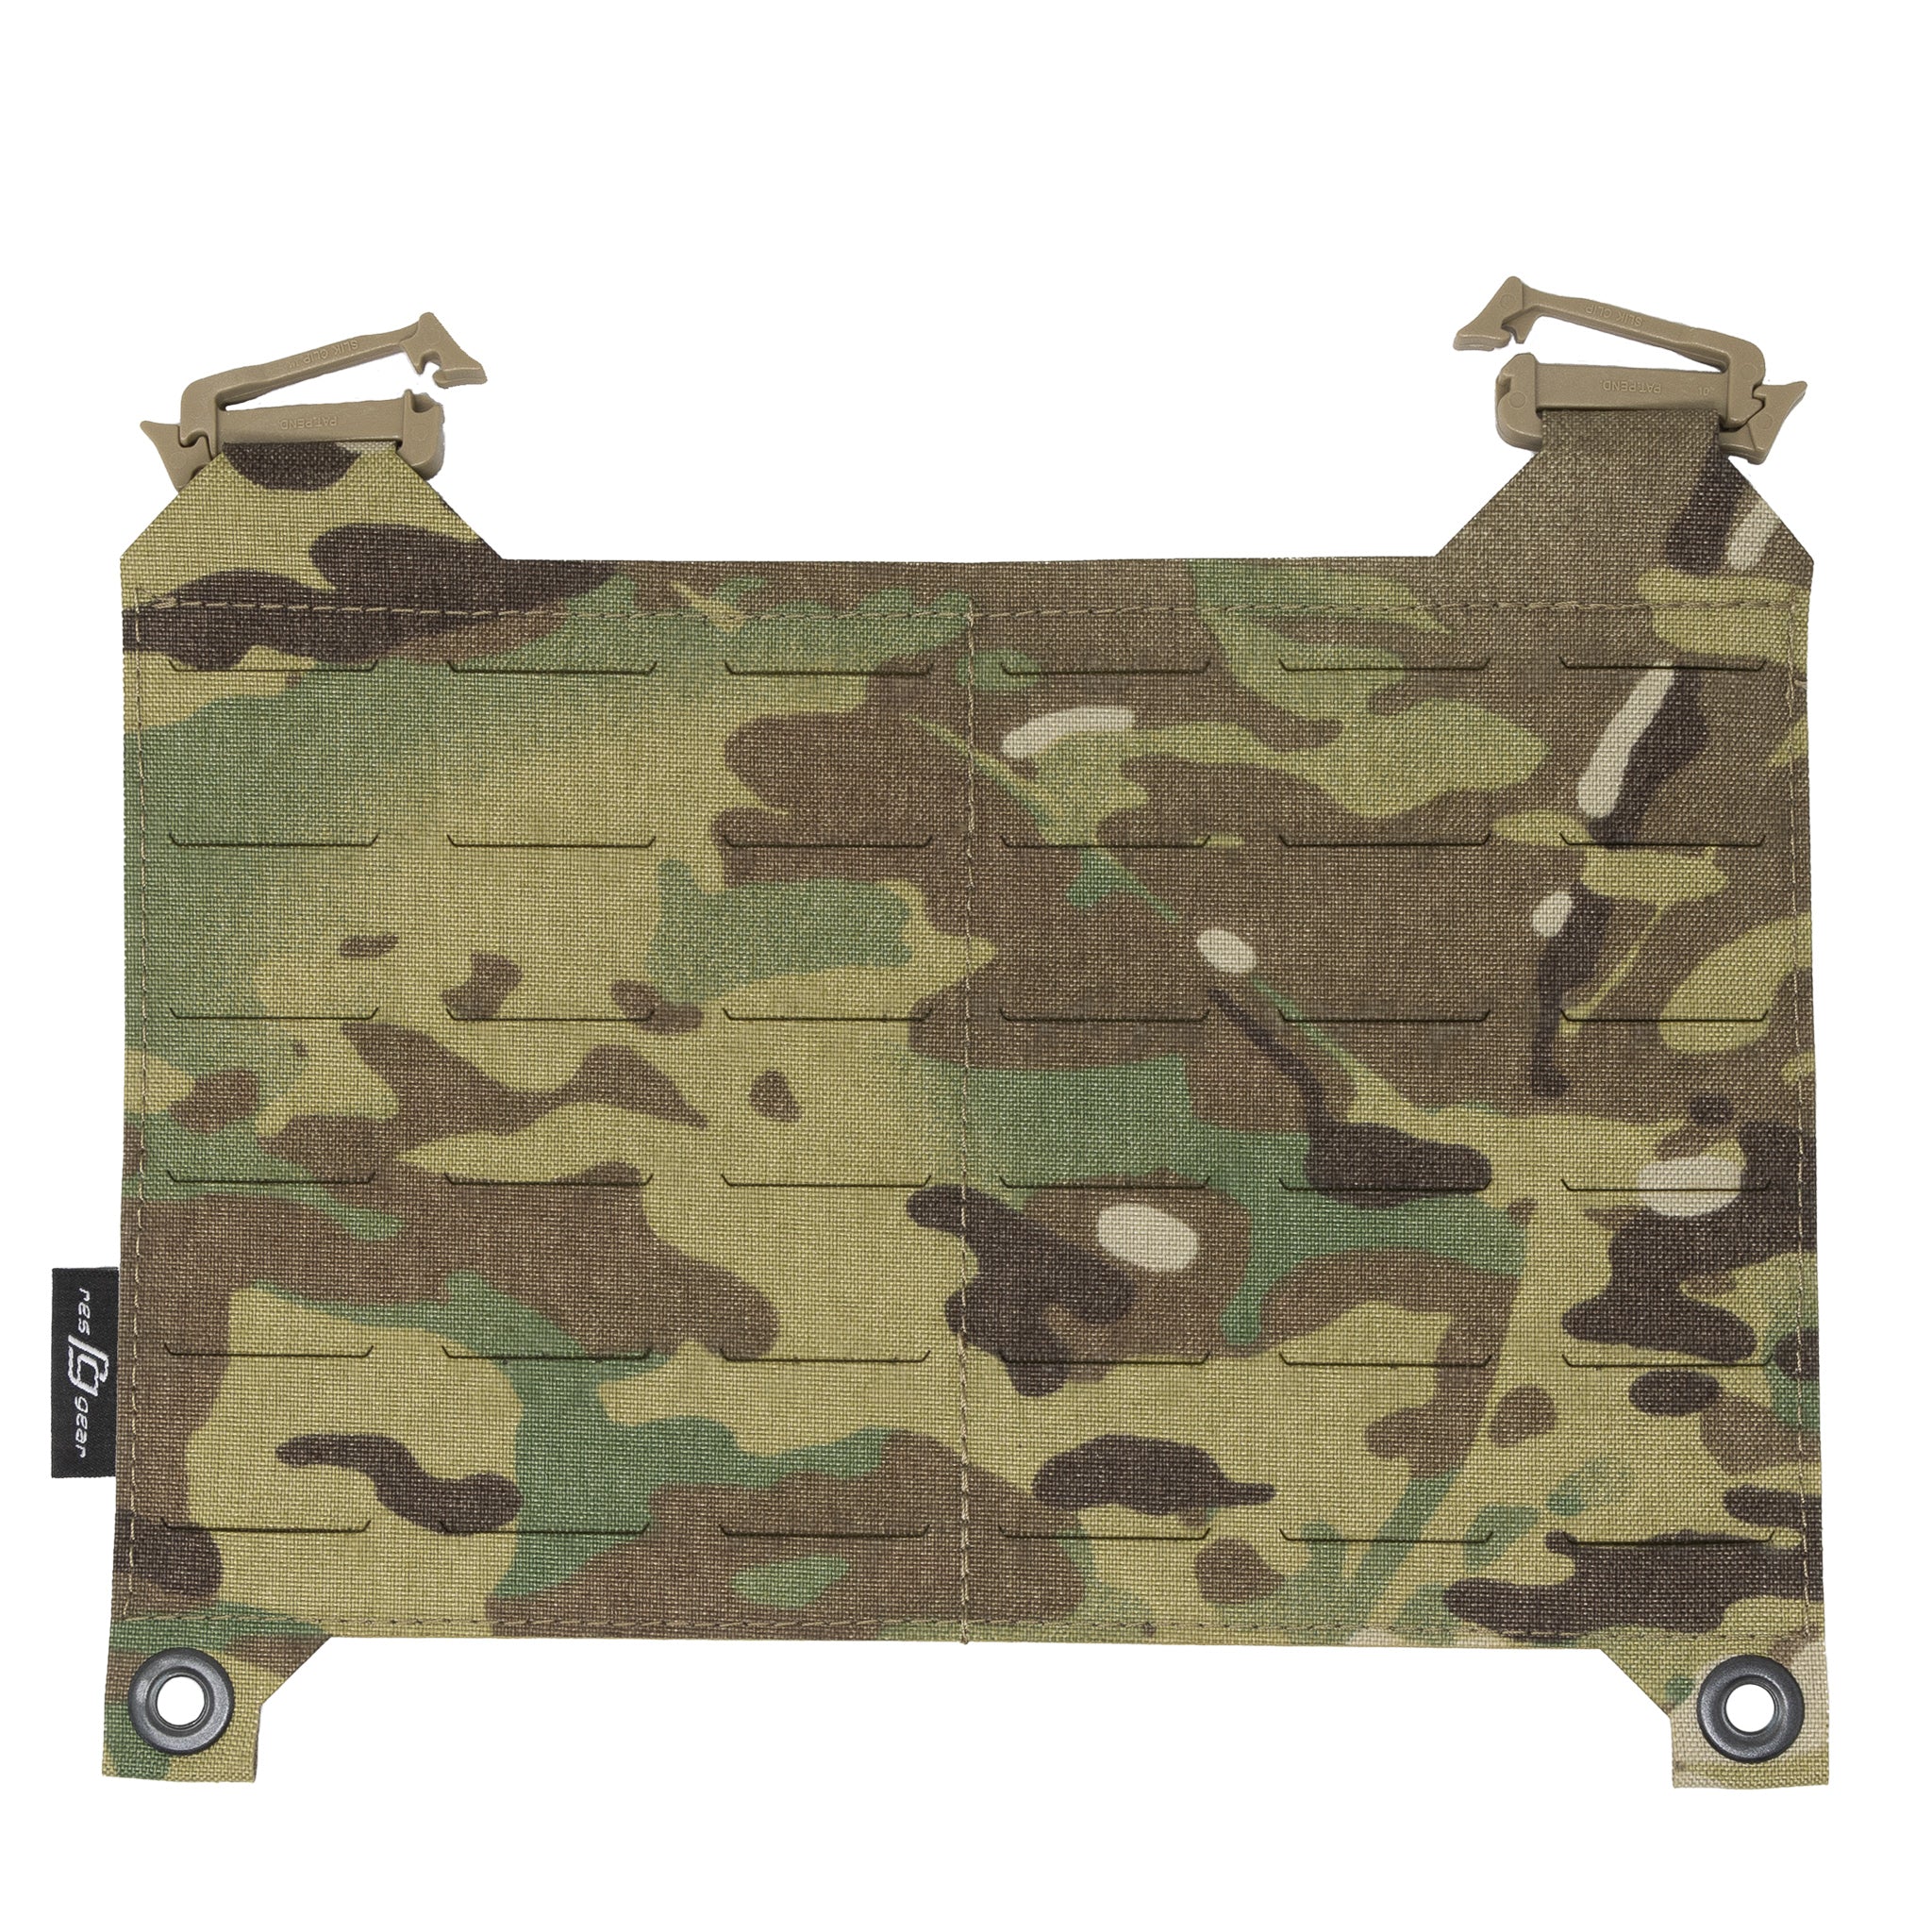 Accessories for Tactical Plate Carriers with Molle System - Zentauron